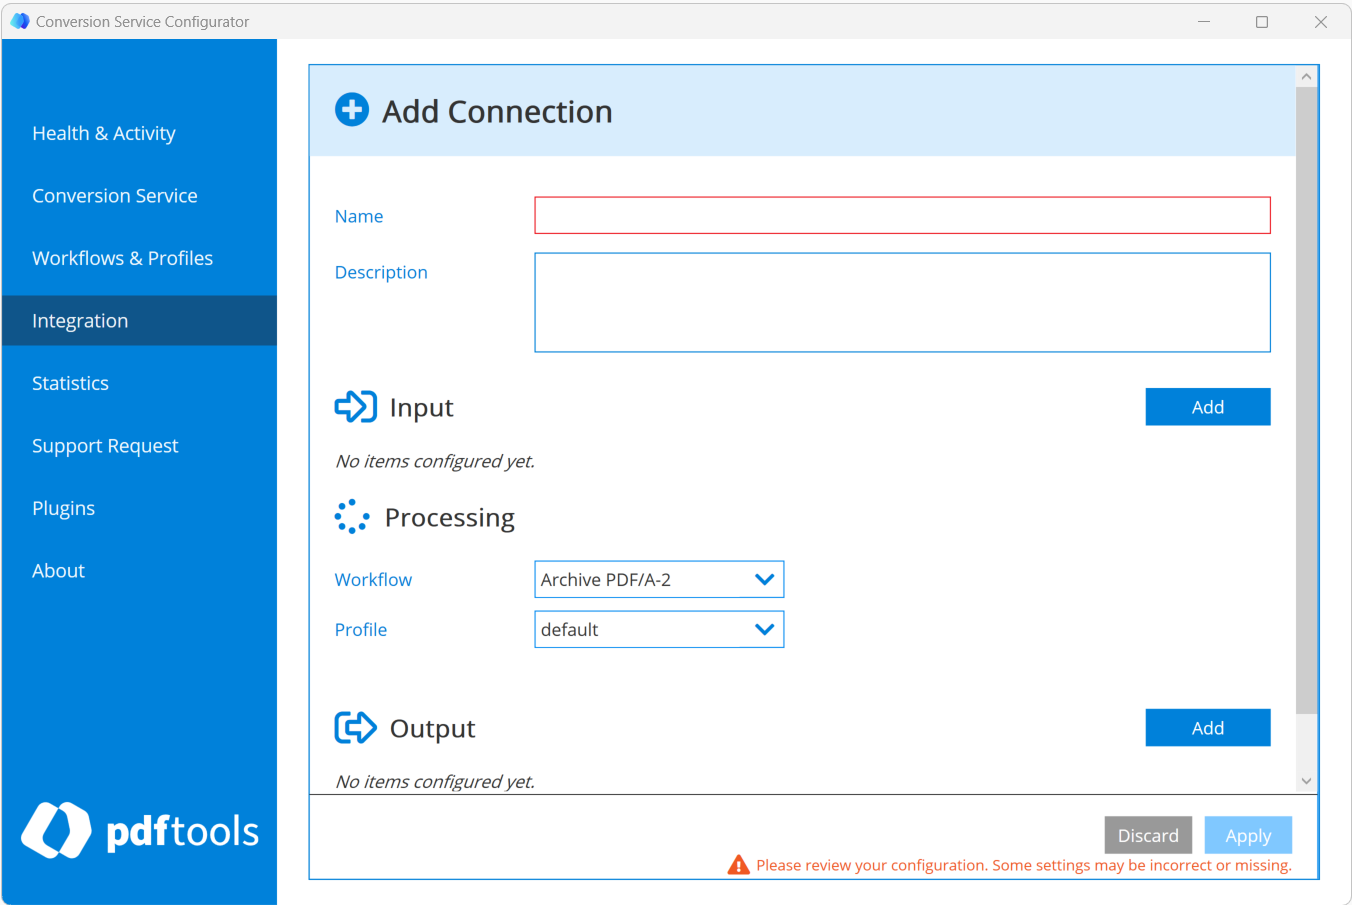 Configure a new connection with the Conversion Service Configurator